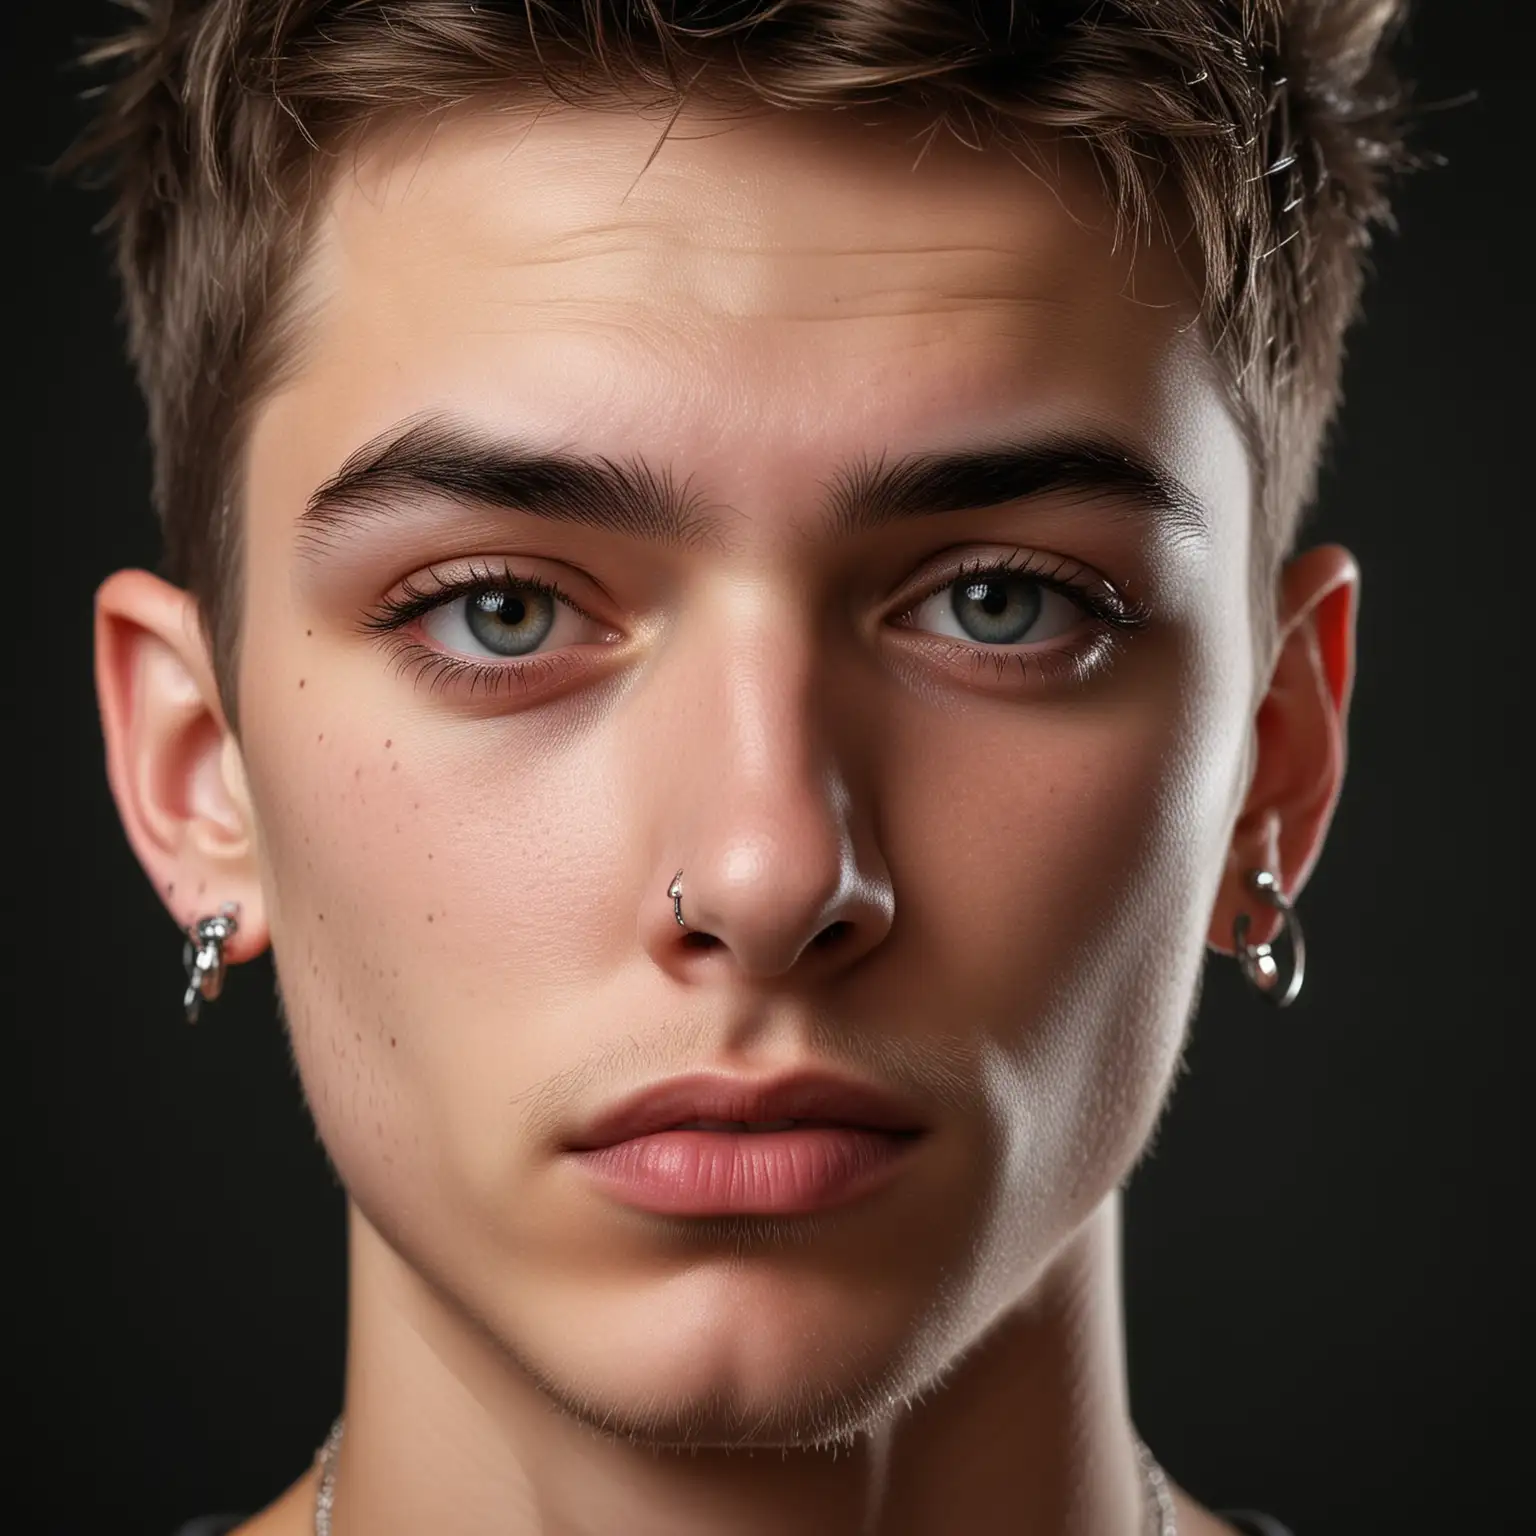 piercing
a close up portrait of handsome boy with piercings on ear and eyebrow to show the piercings . the photo focus is on piercings
black background
Render this scene as a highly stylized, almost painterly digital illustration with careful attention to lighting, textures and muted colors. The lack of literal representation allows the deeper emotional resonance to take precedence.